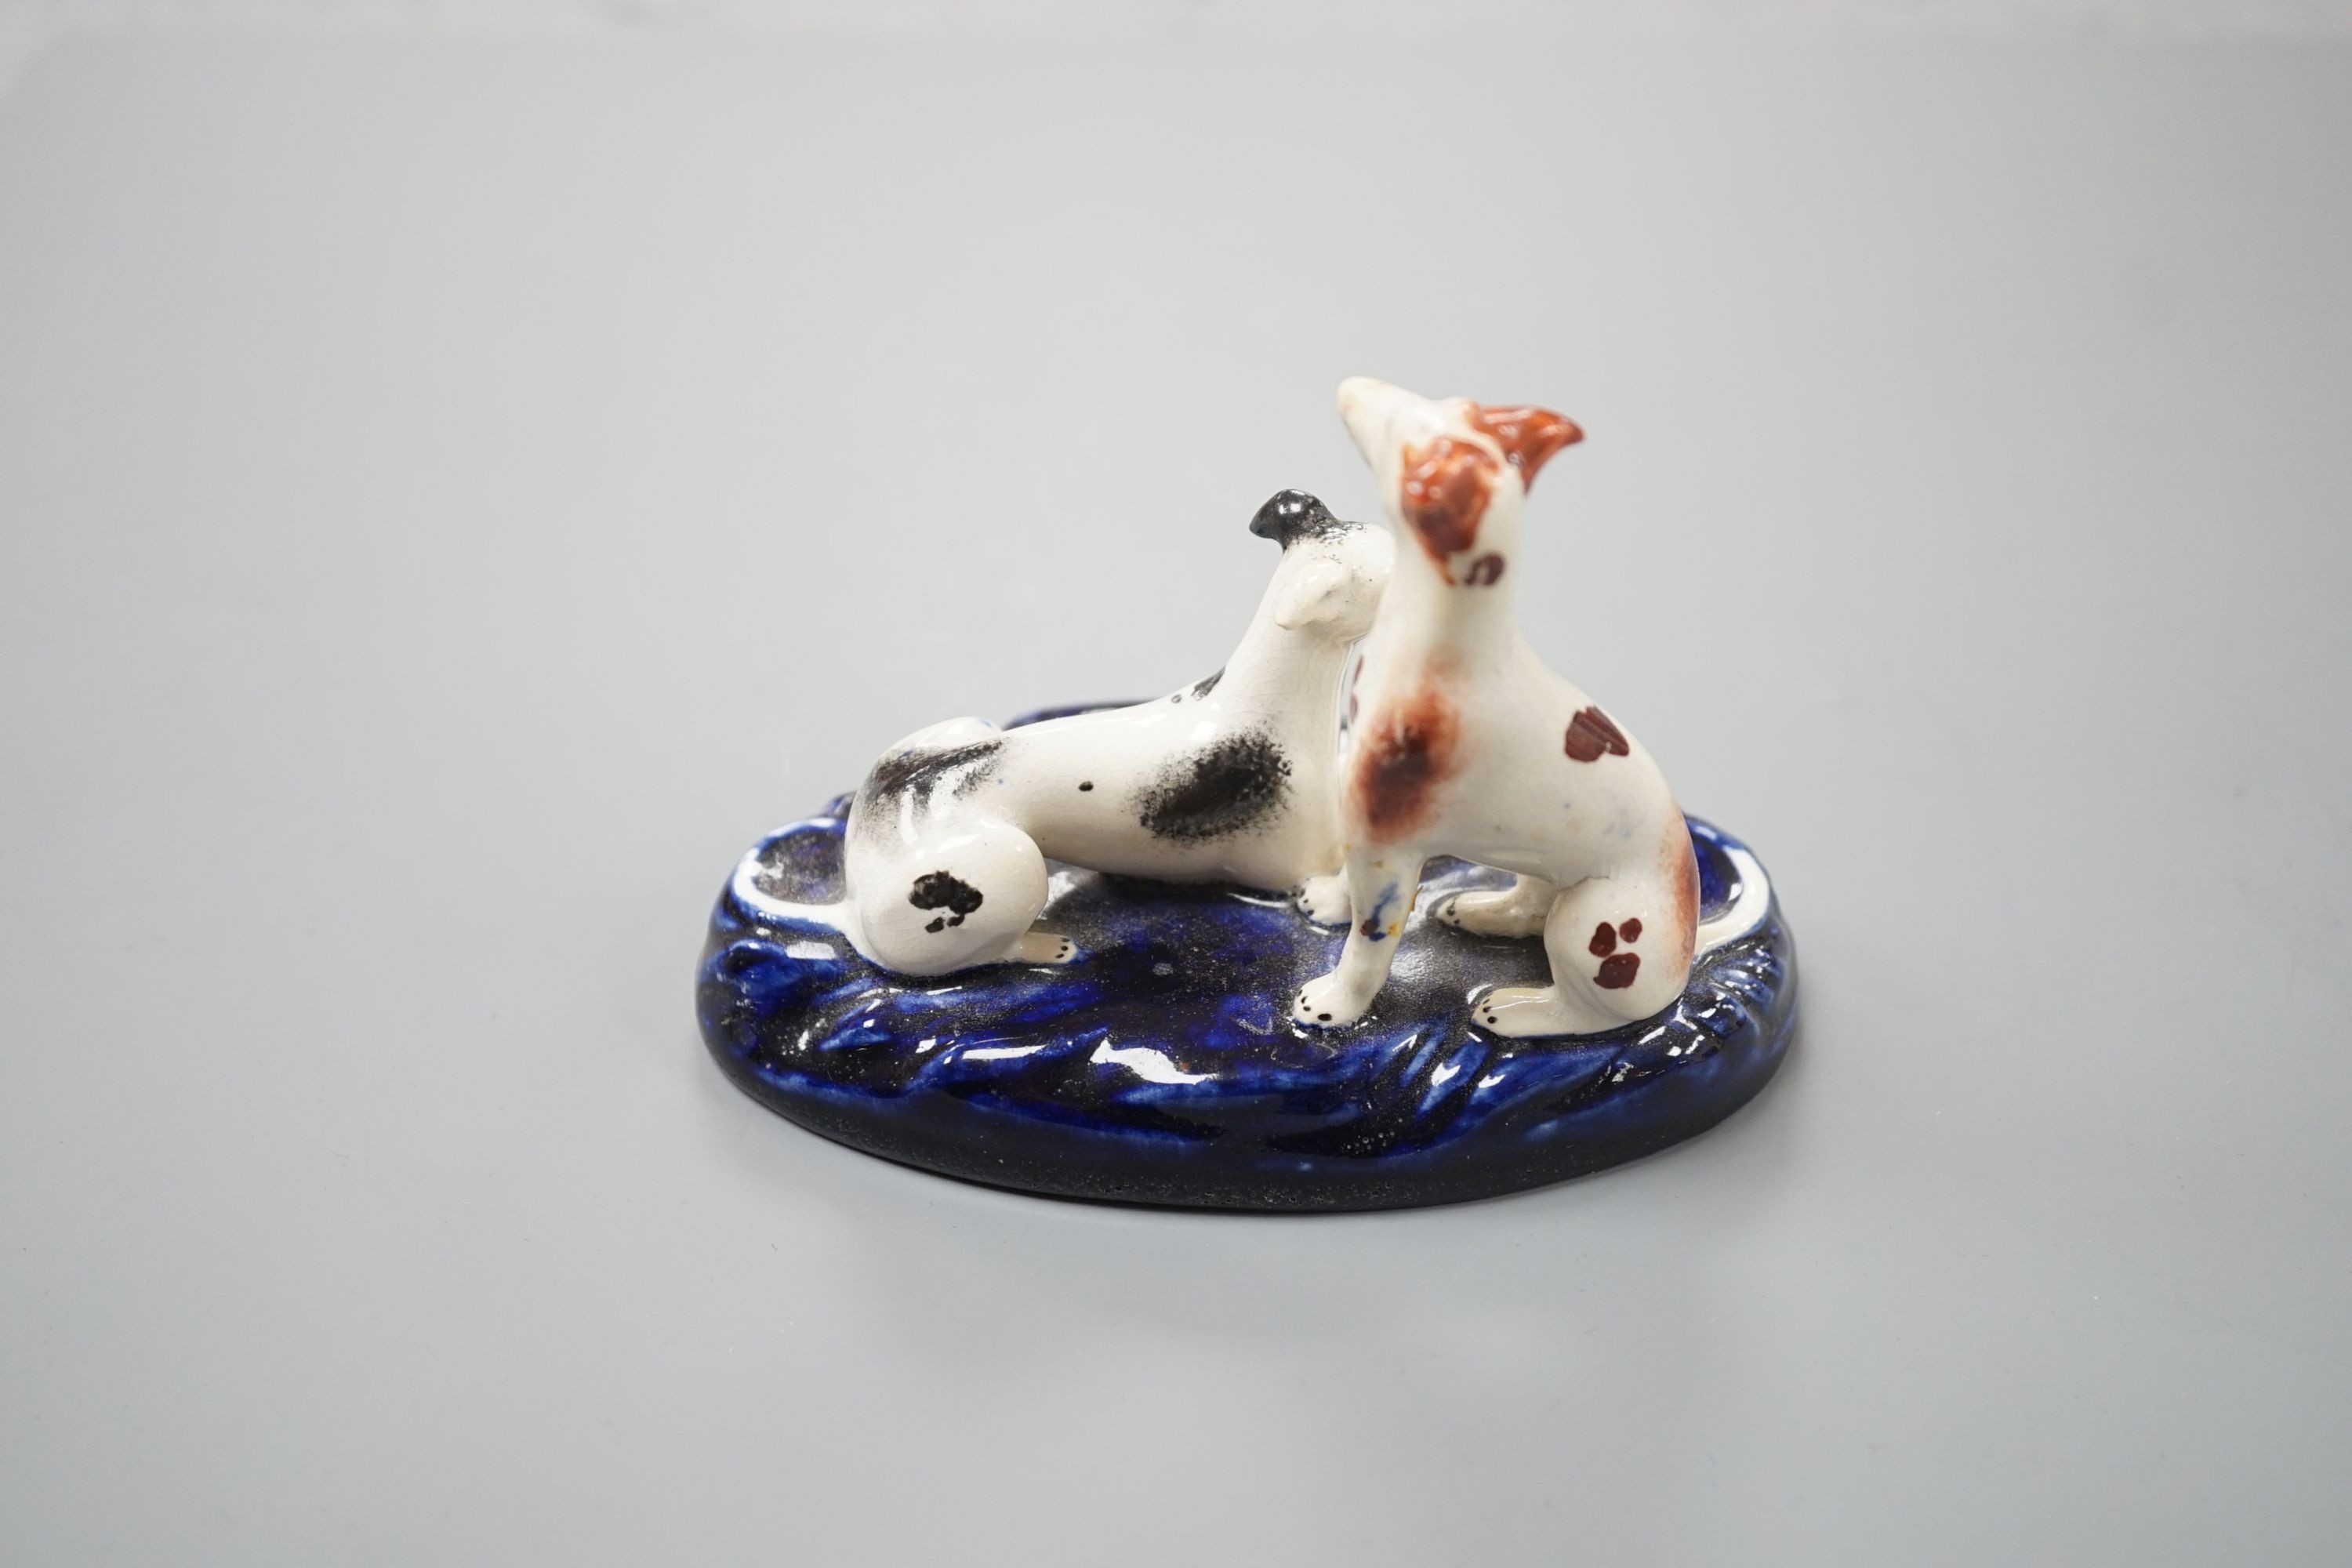 A Staffordshire porcelain group of two greyhounds, c.1835-50, 10.5 cm long, Provenance: Dennis G.Rice collection